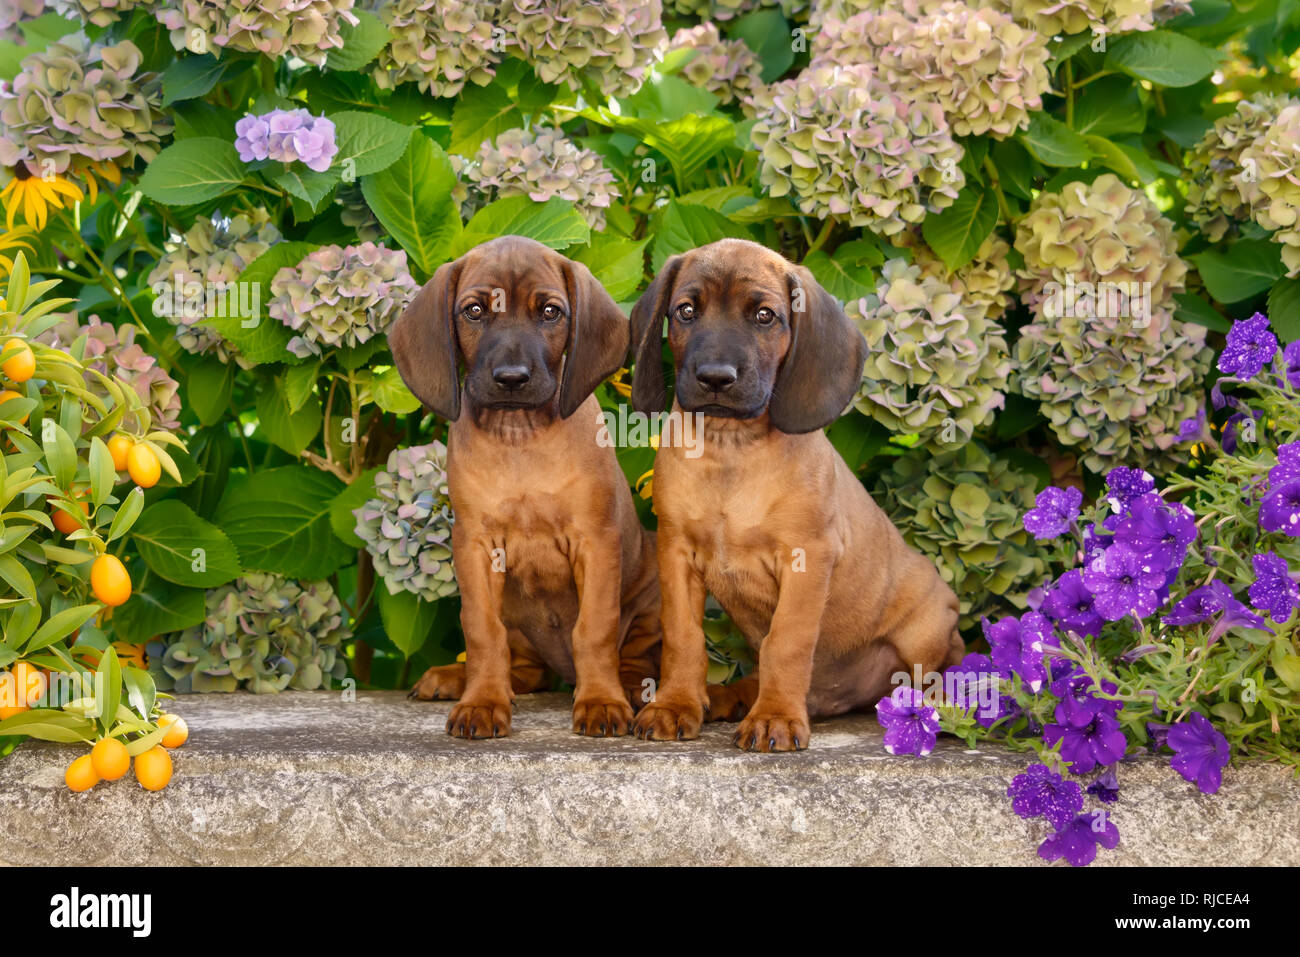 Two young Bavarian Mountain Hound dog puppies, 8 weeks old, sitting faithfully side by side on a bench in a flowering garden, Germany Stock Photo